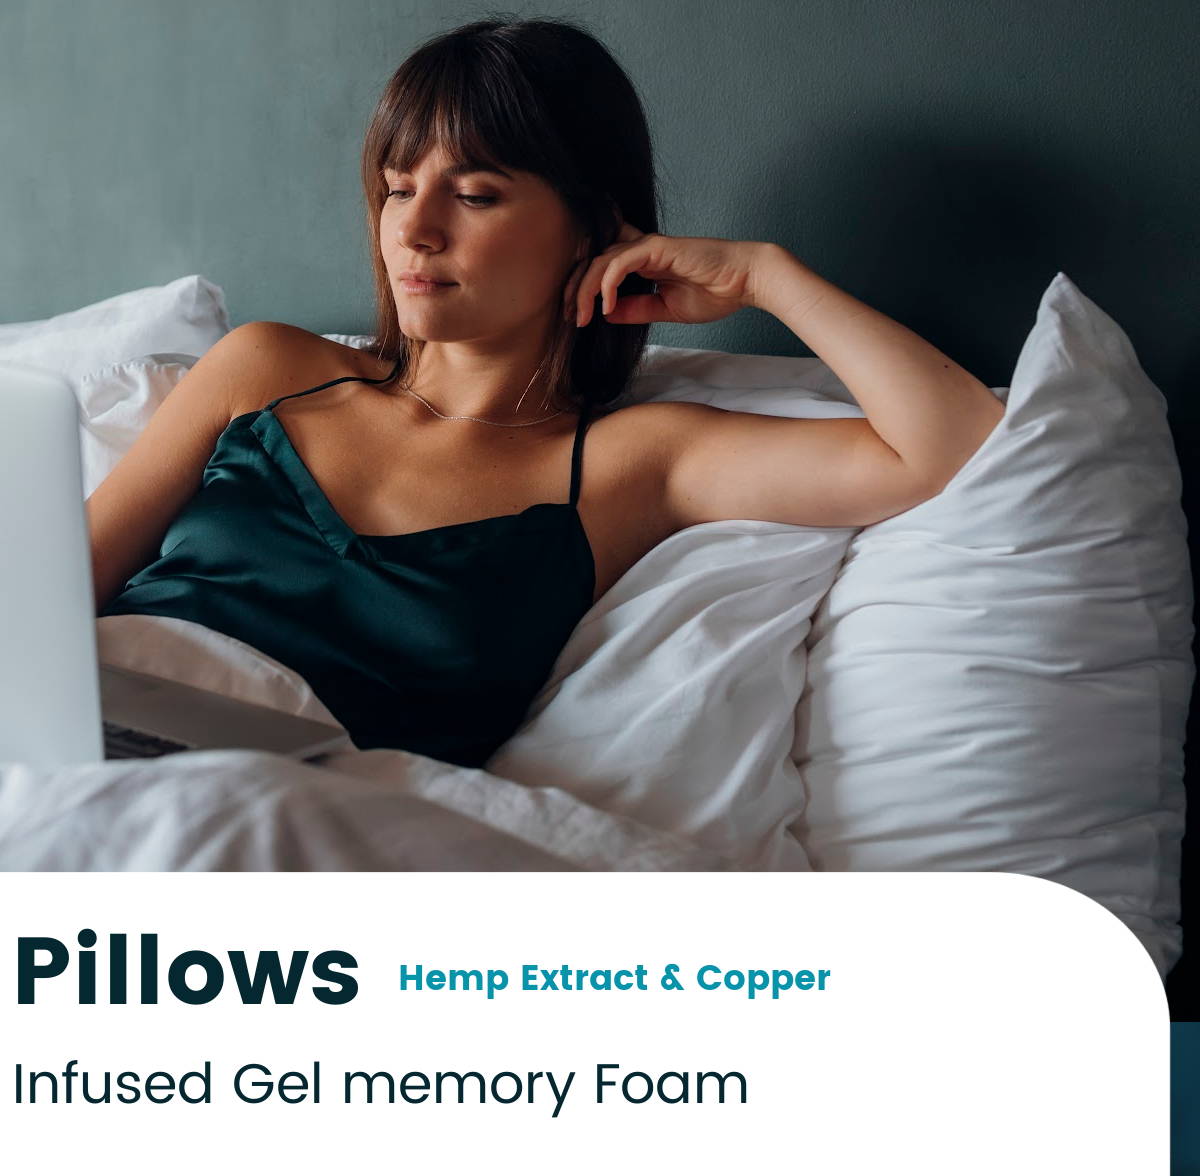 Infused gel memory foam pillows with cbd and copper.